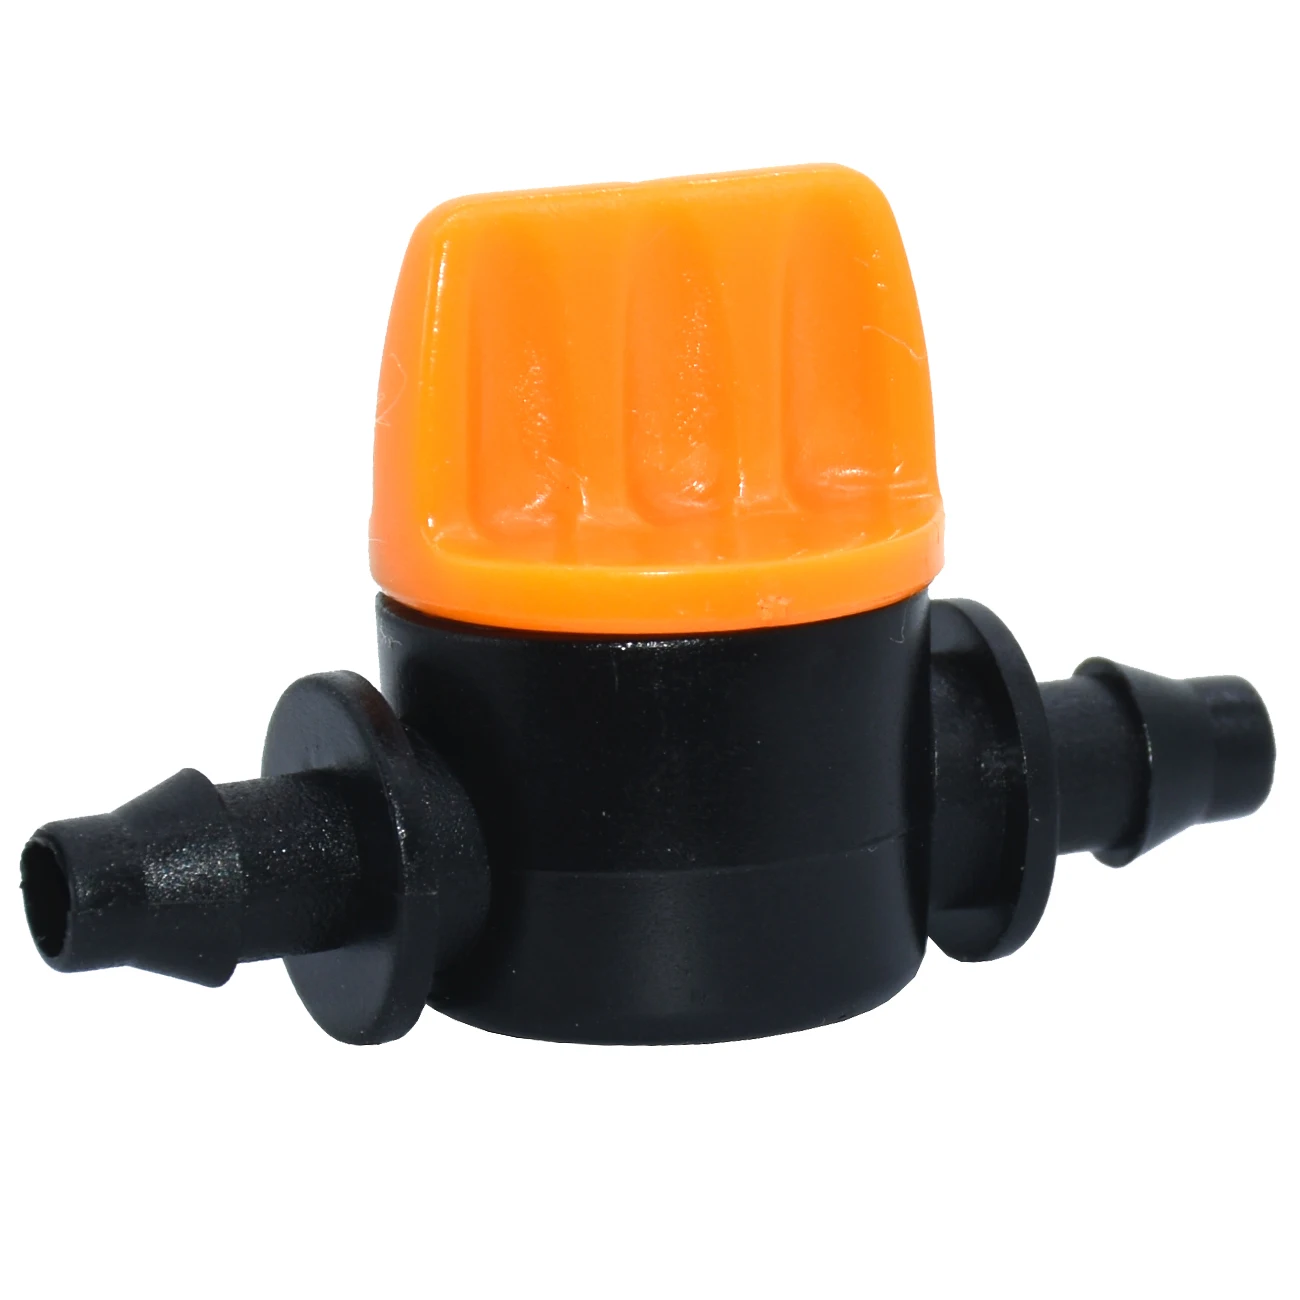 

Mini Valve with 4/7mm Hose Garden Irrigation Barbed Water flow control valve Agriculture tools Drip Irrigation Fittings